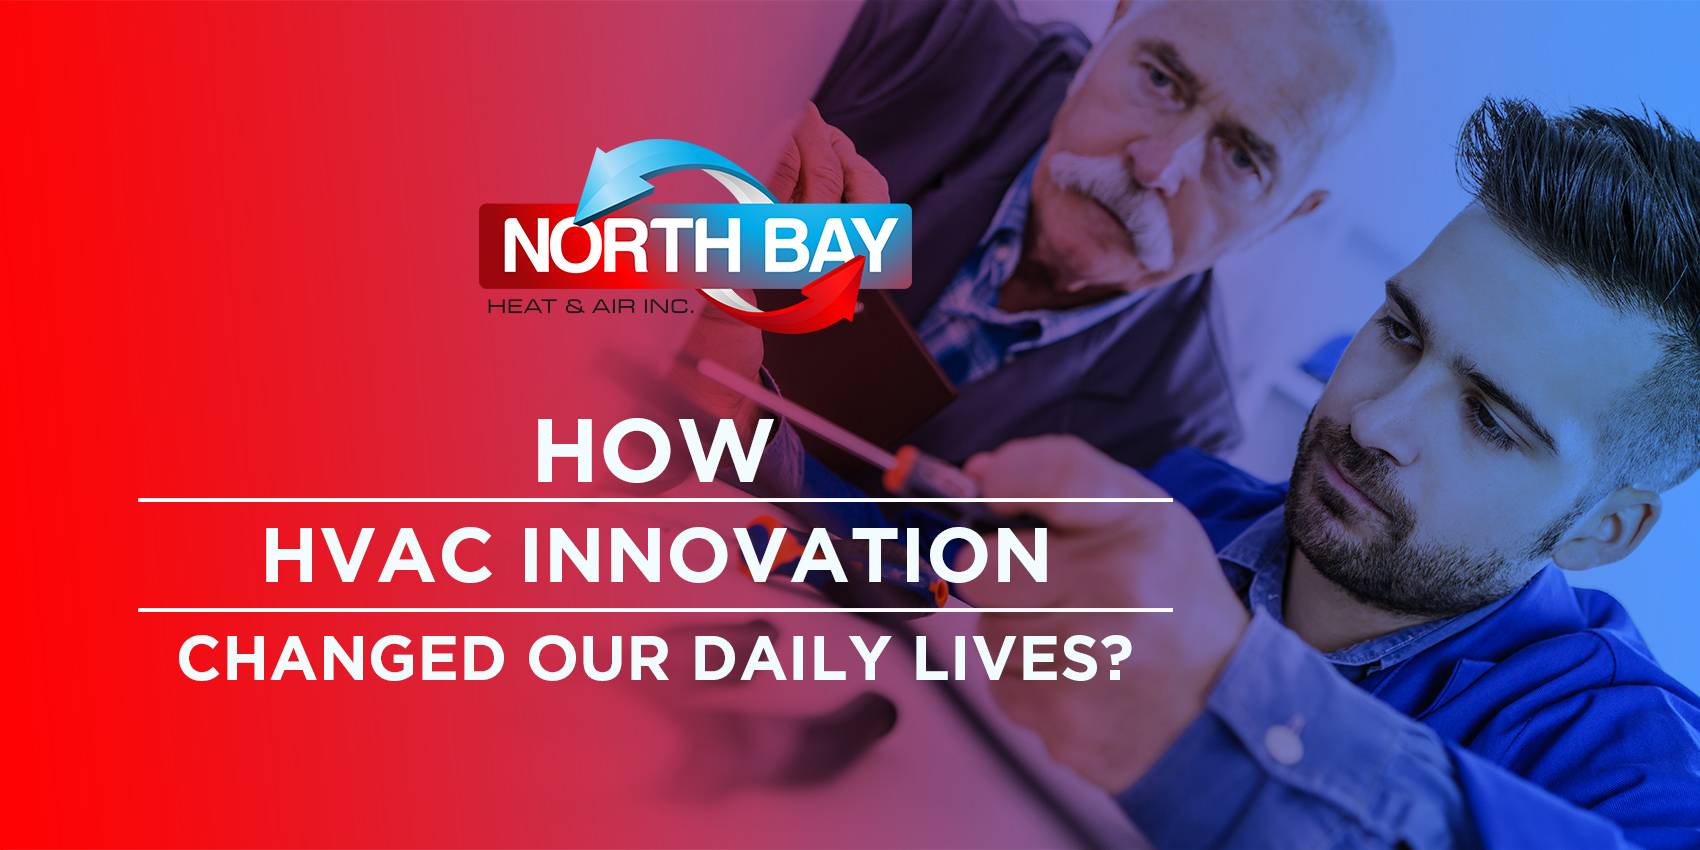 How HVAC Innovation Changed Our Daily Lives?